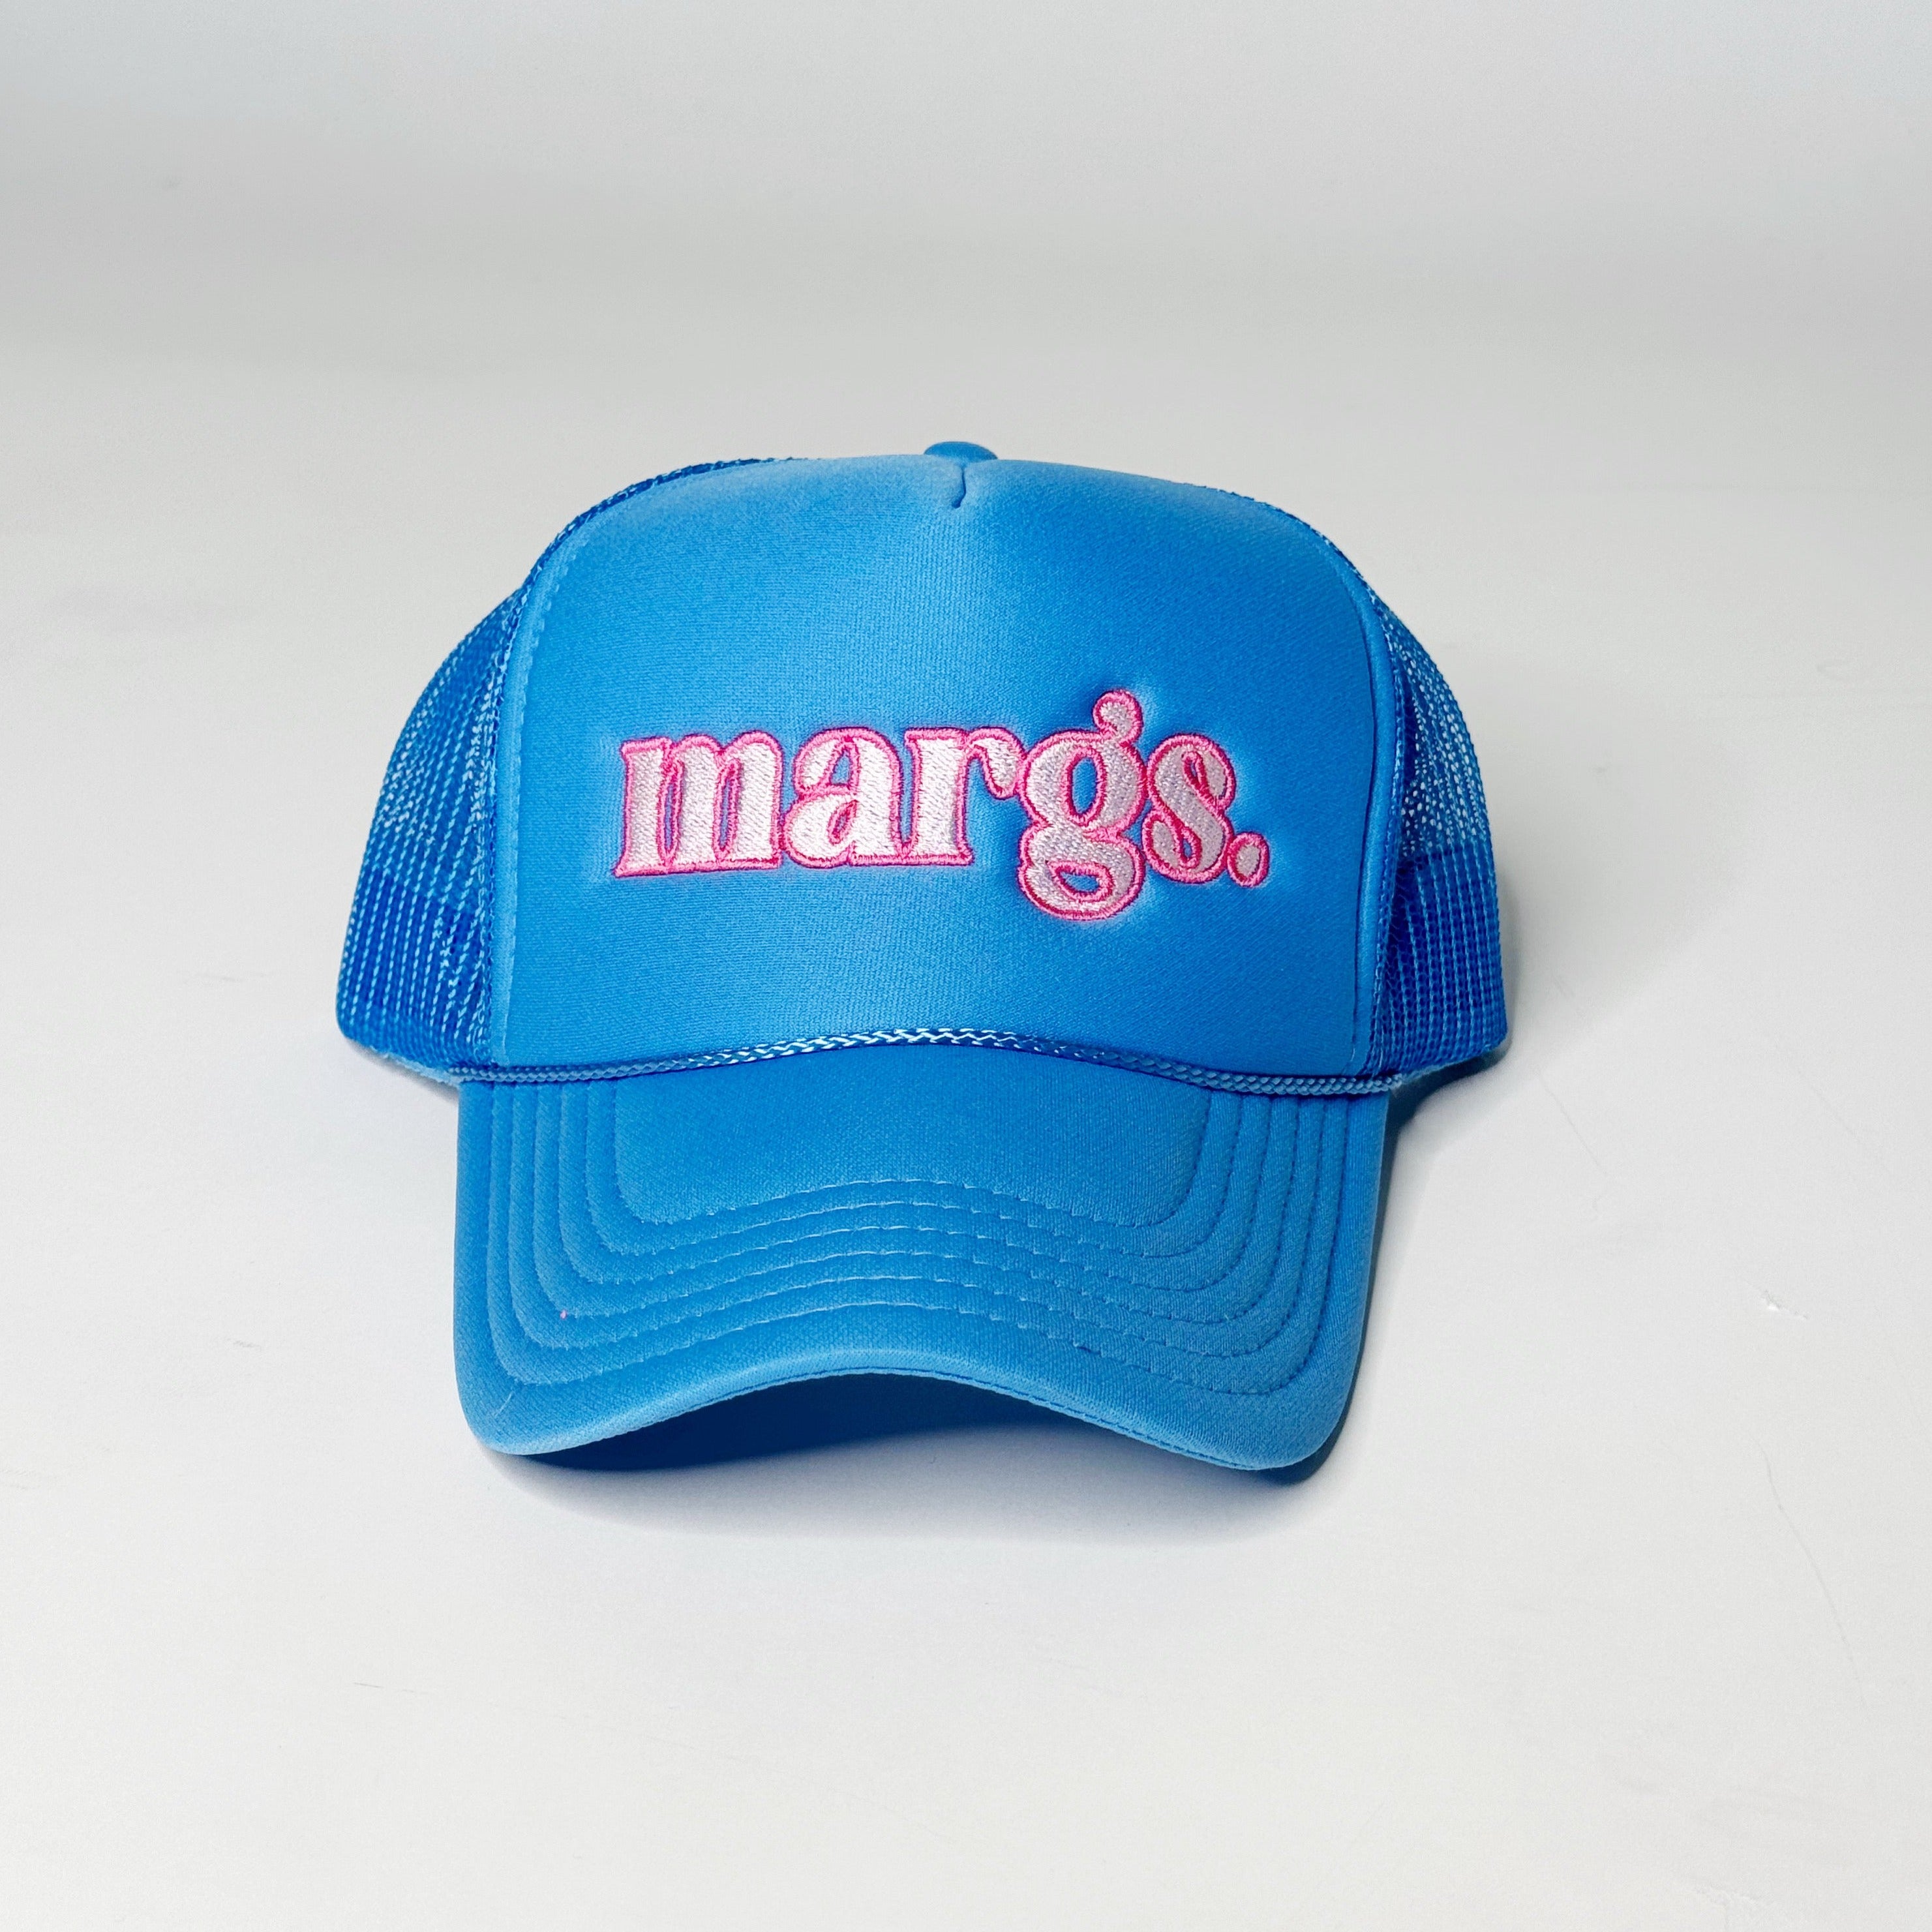 Margs. Pastel Embroidered Trucker Hats